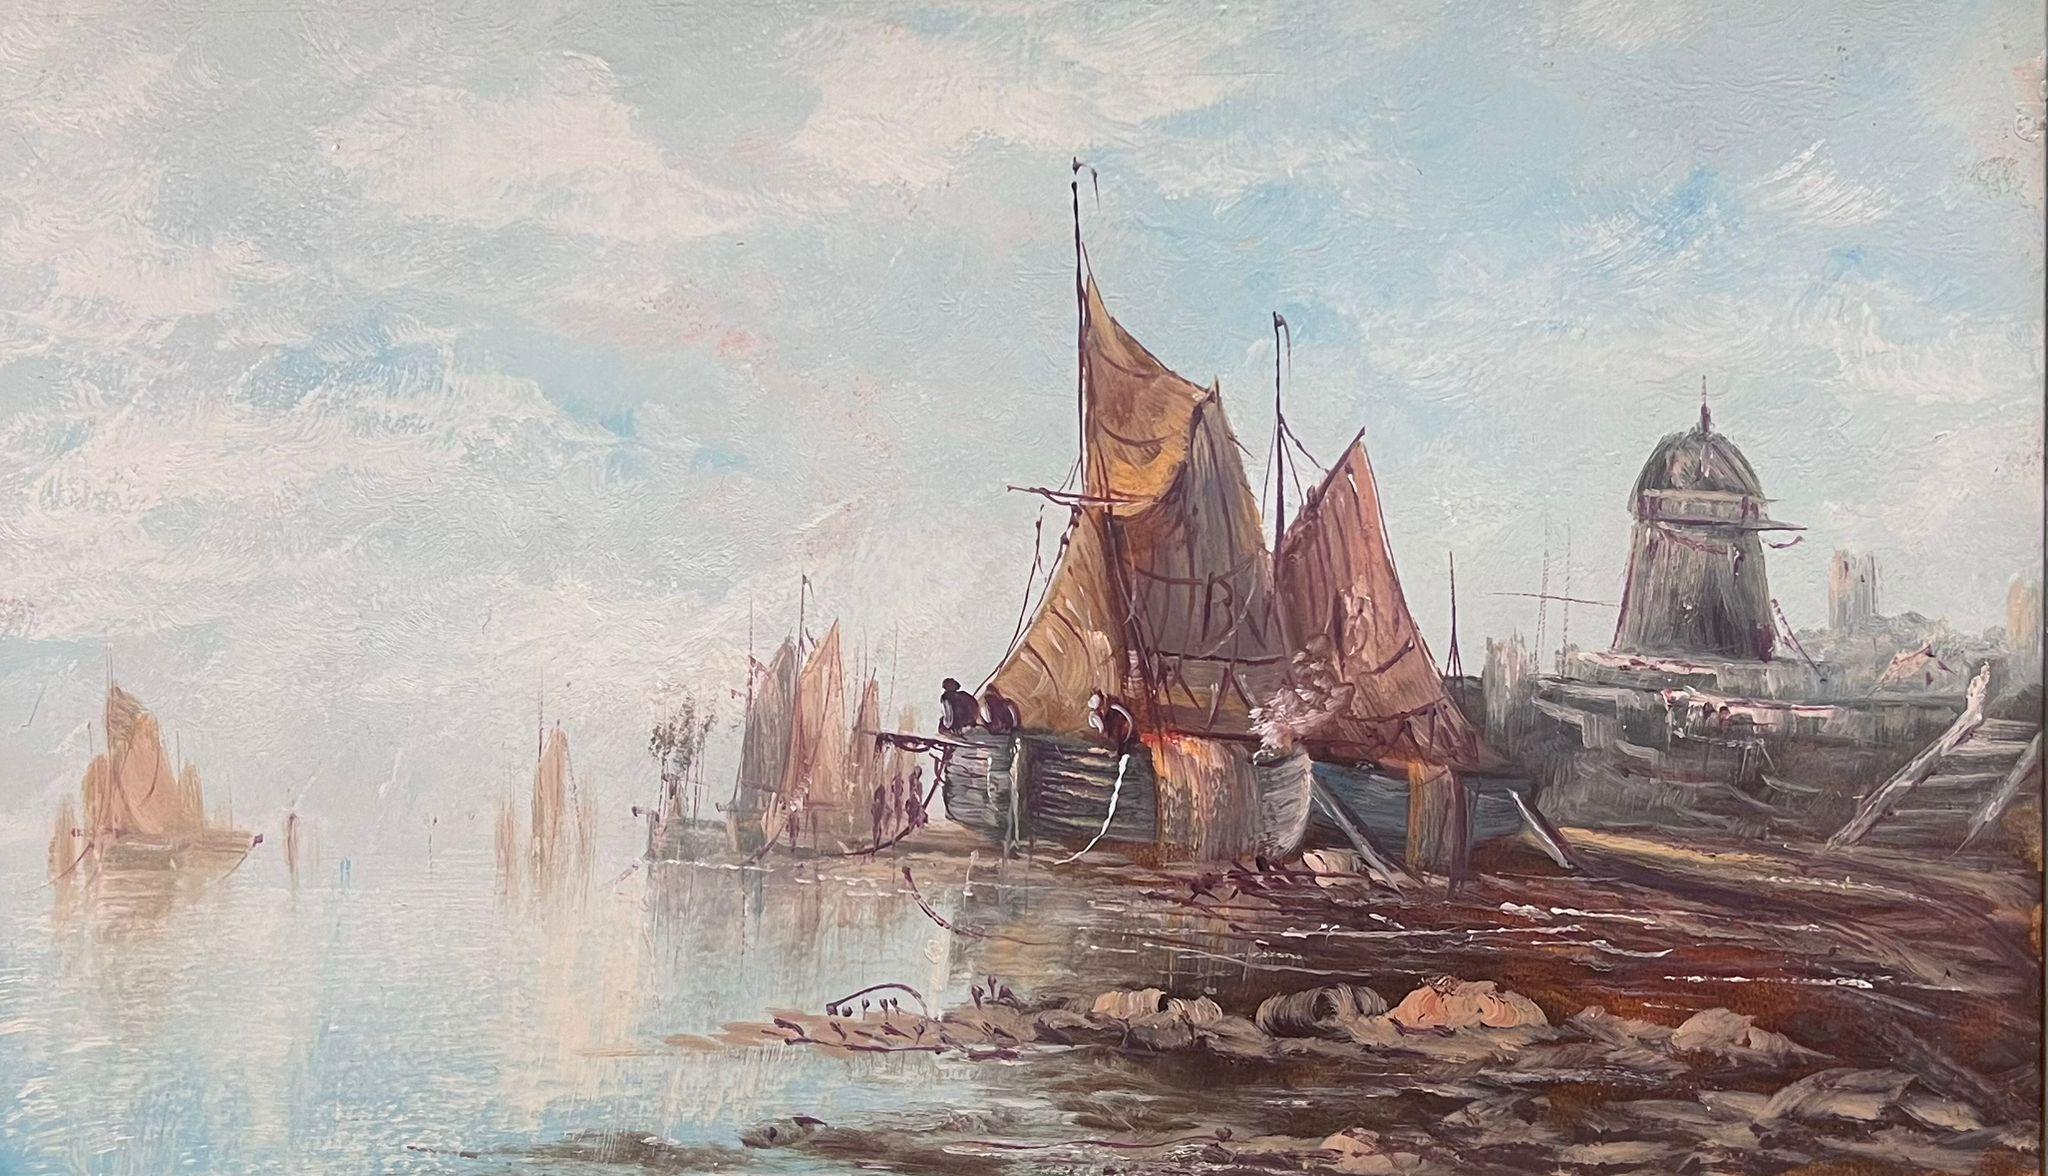 The Old Fishing Harbour
British School, late 19th century
oil on board, framed
framed: 19 x 27 inches
board: 14 x 22 inches
provenance: private collection, UK
condition: very good and sound condition
unsigned work